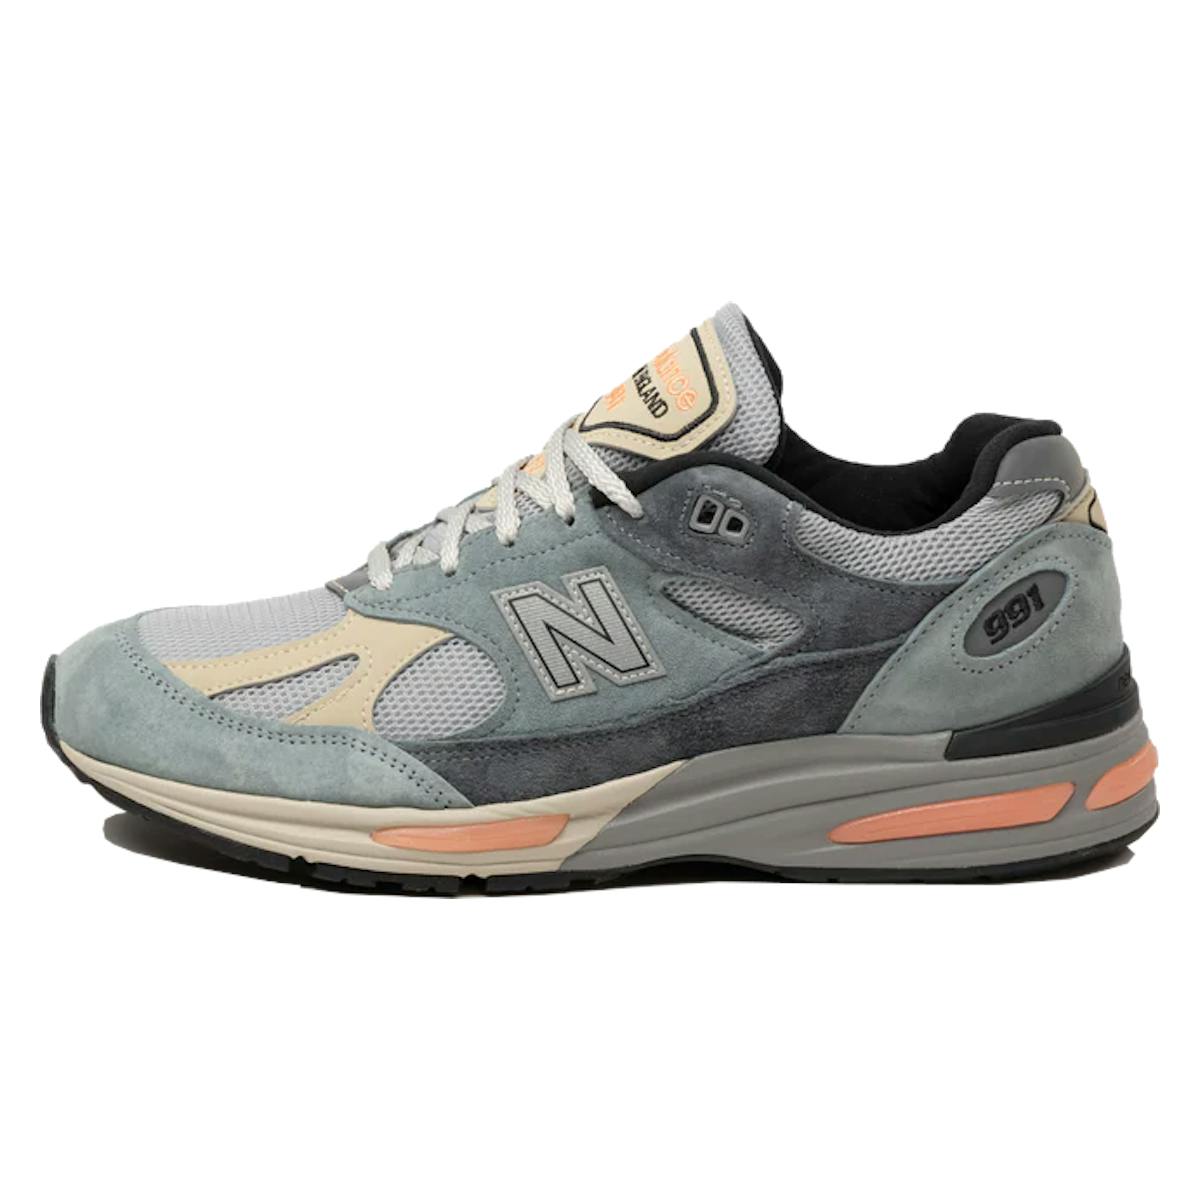 New Balance 991v2 Made in UK "Silver Blue"